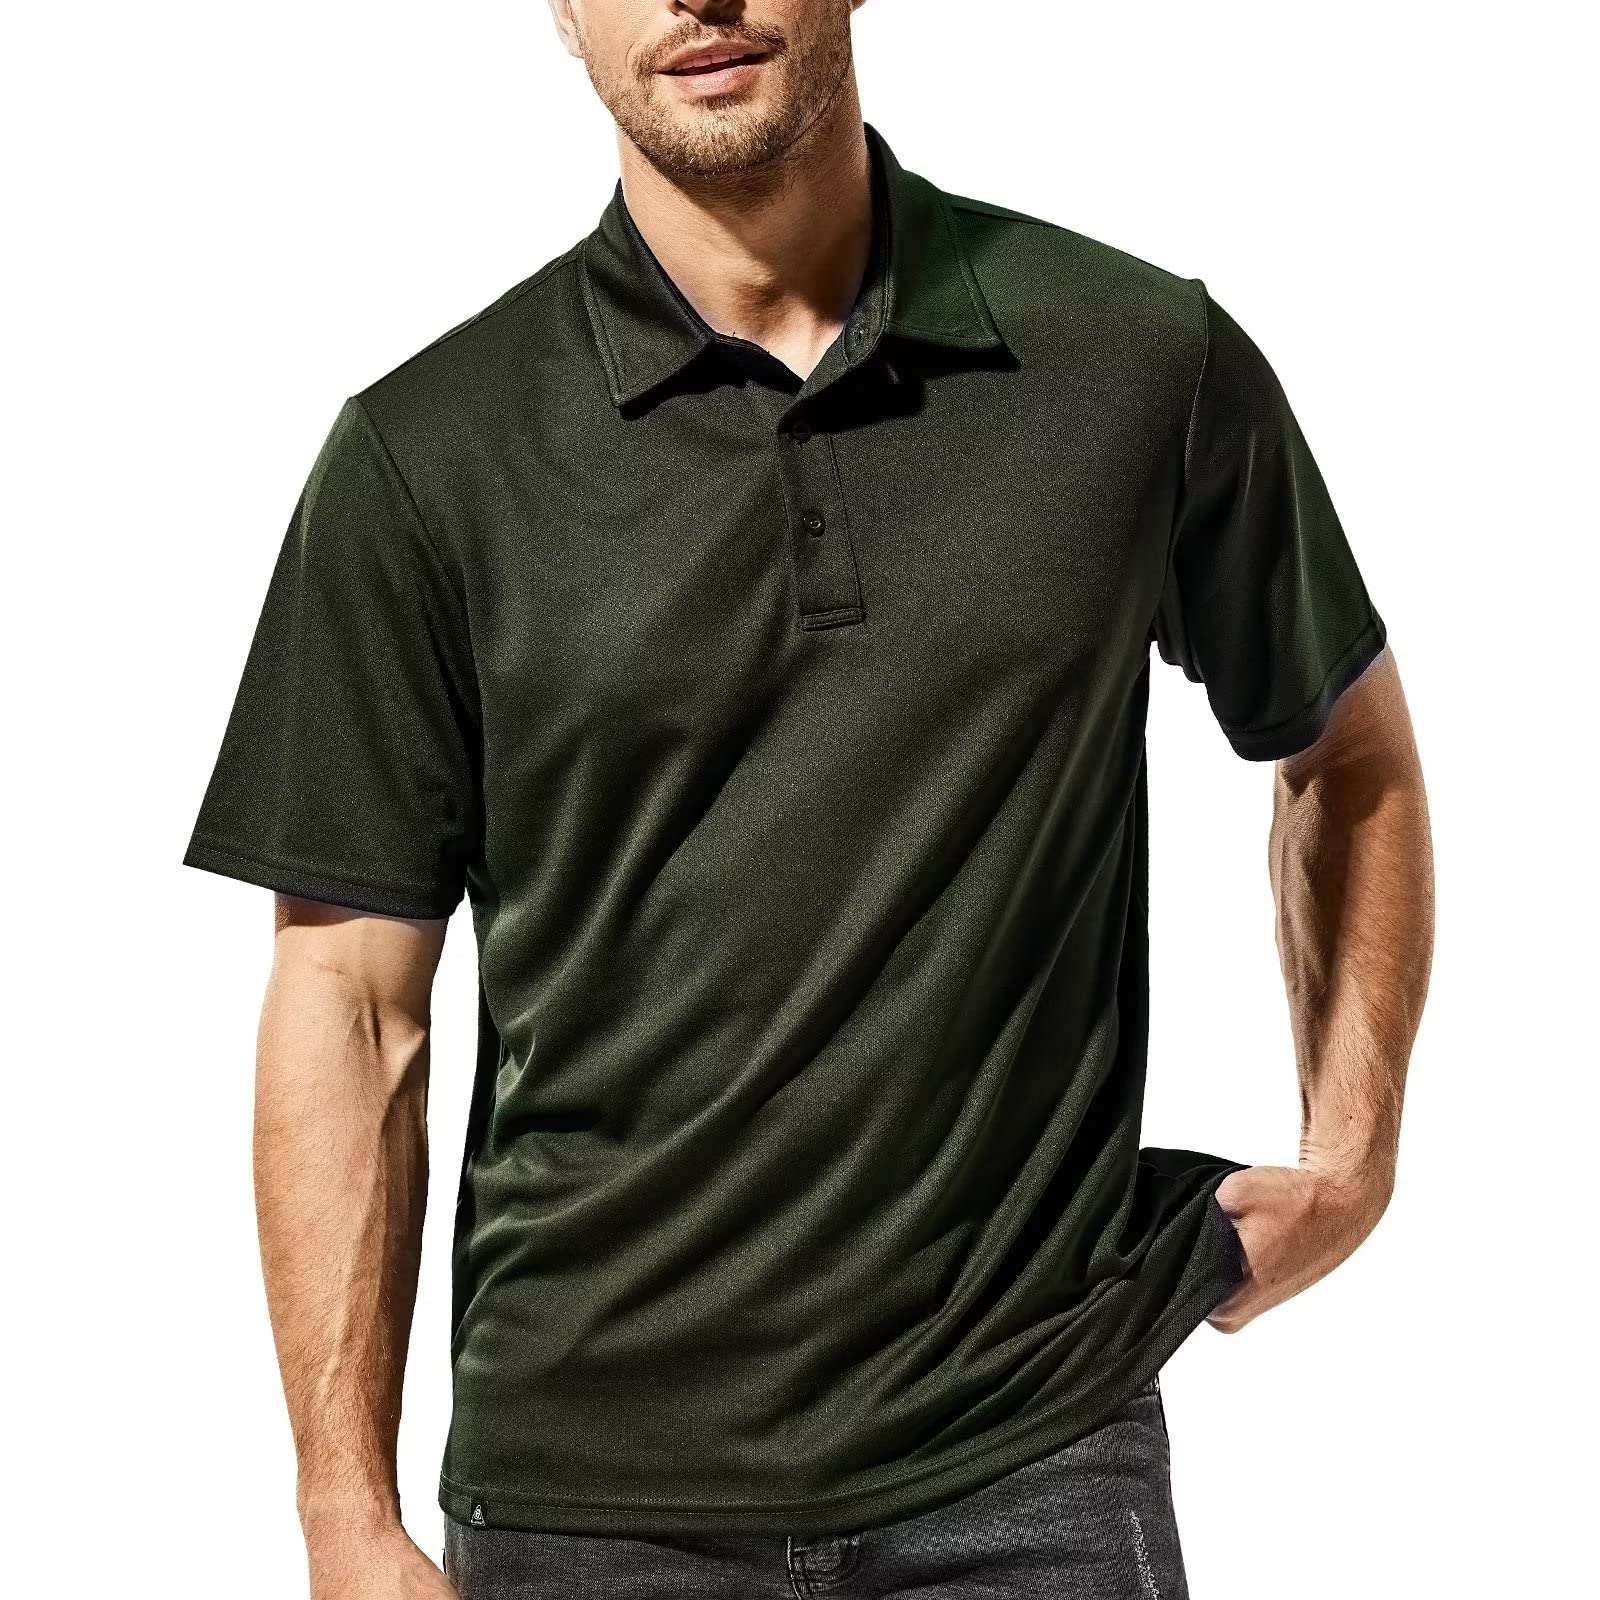 Haimont Long Sleeve Cotton Polo Shirts for Men Soft Golf Shirts with Collar - 4